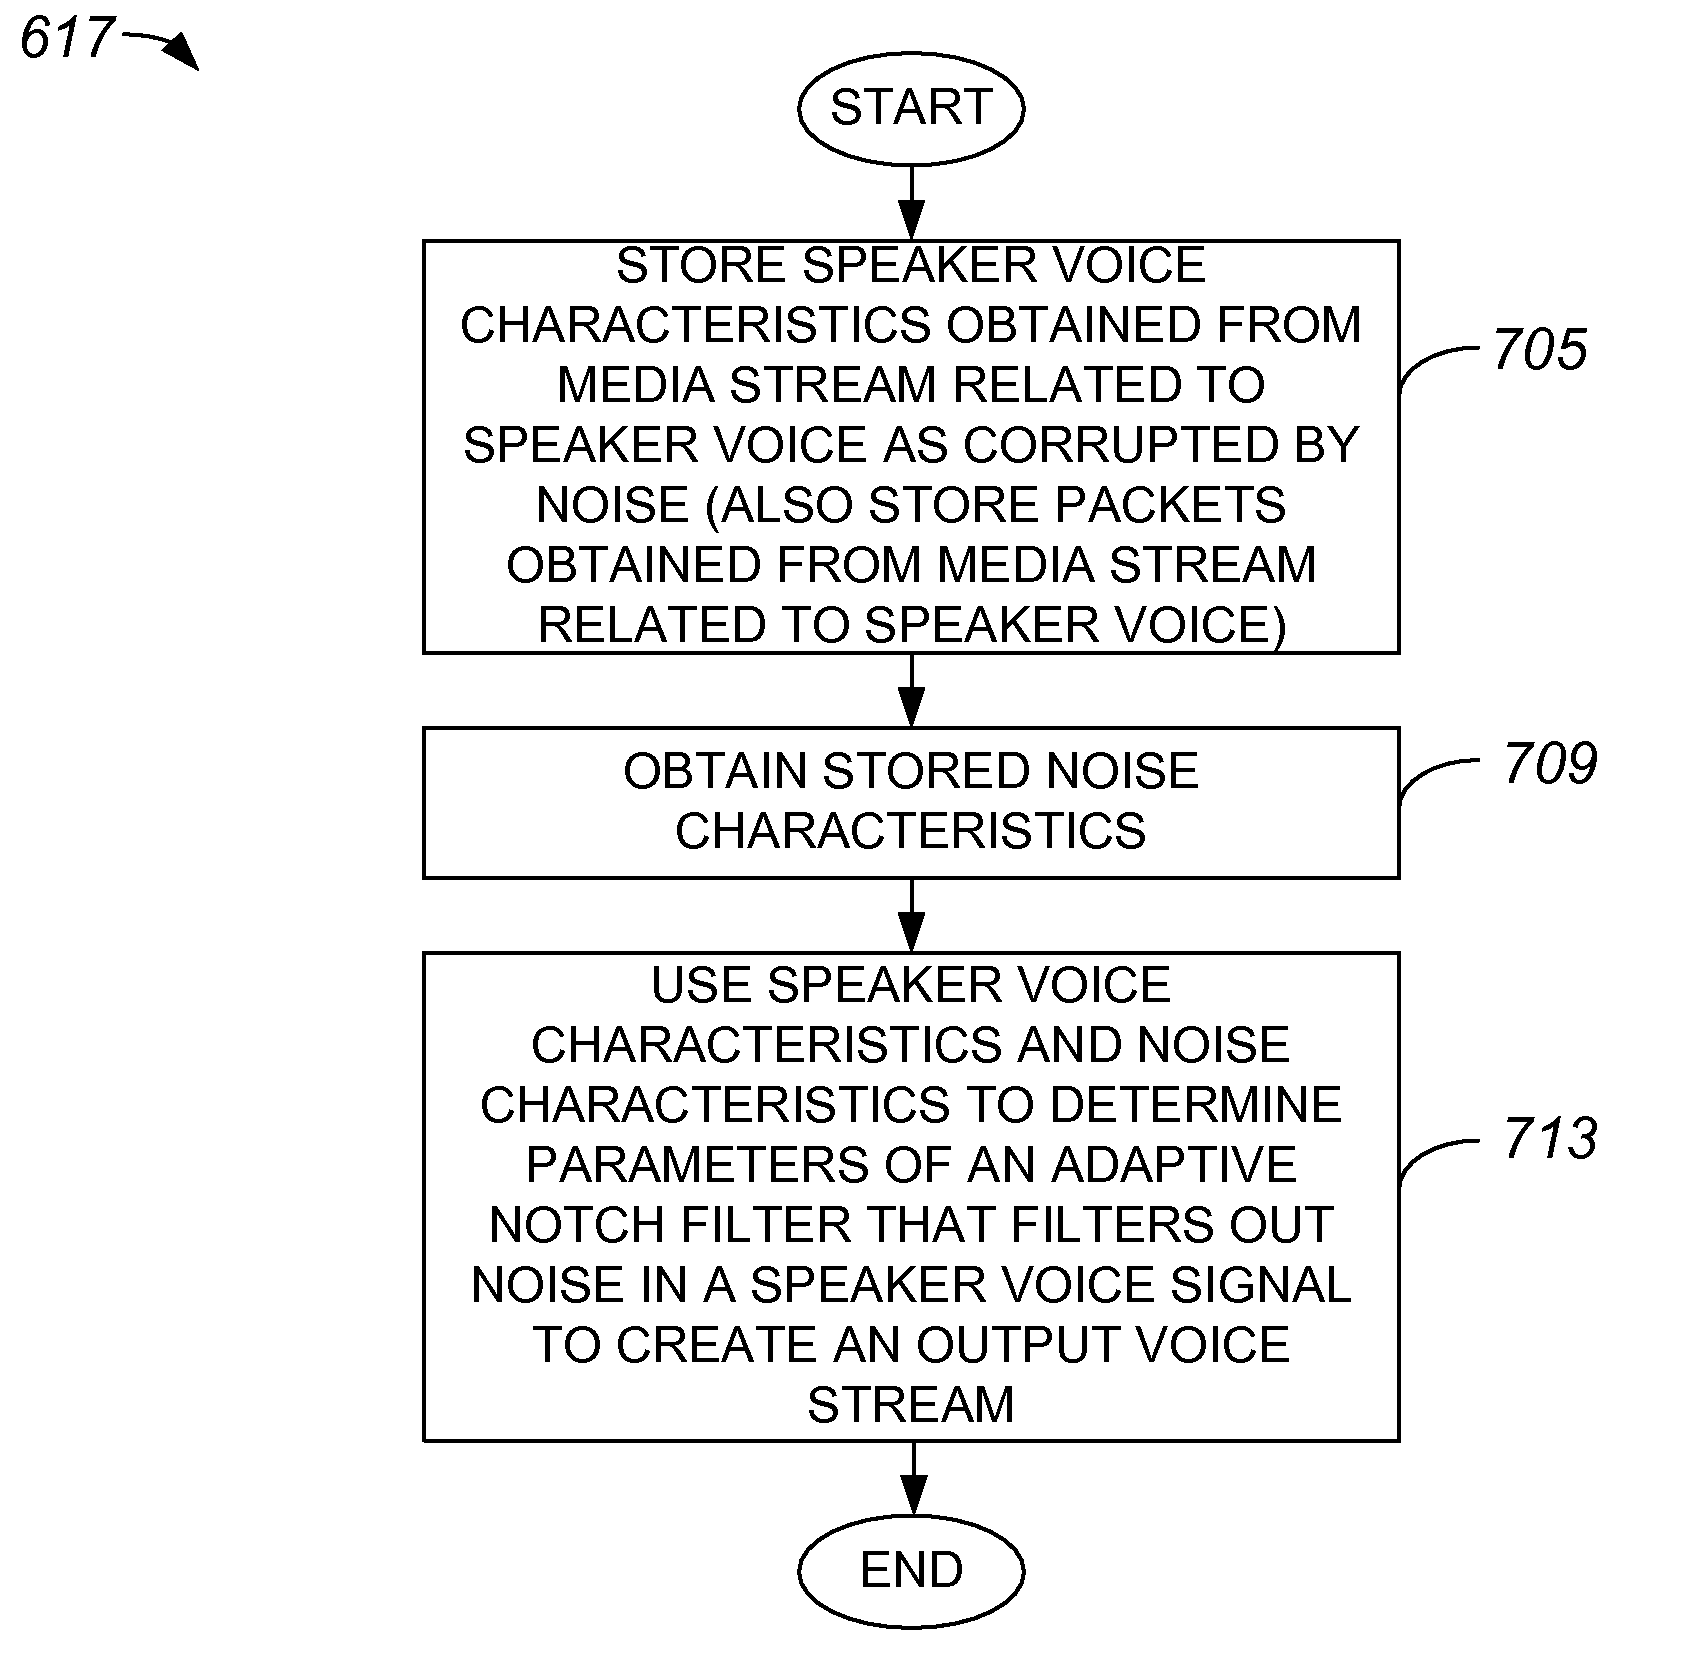 Push-to-talk system with enhanced noise reduction